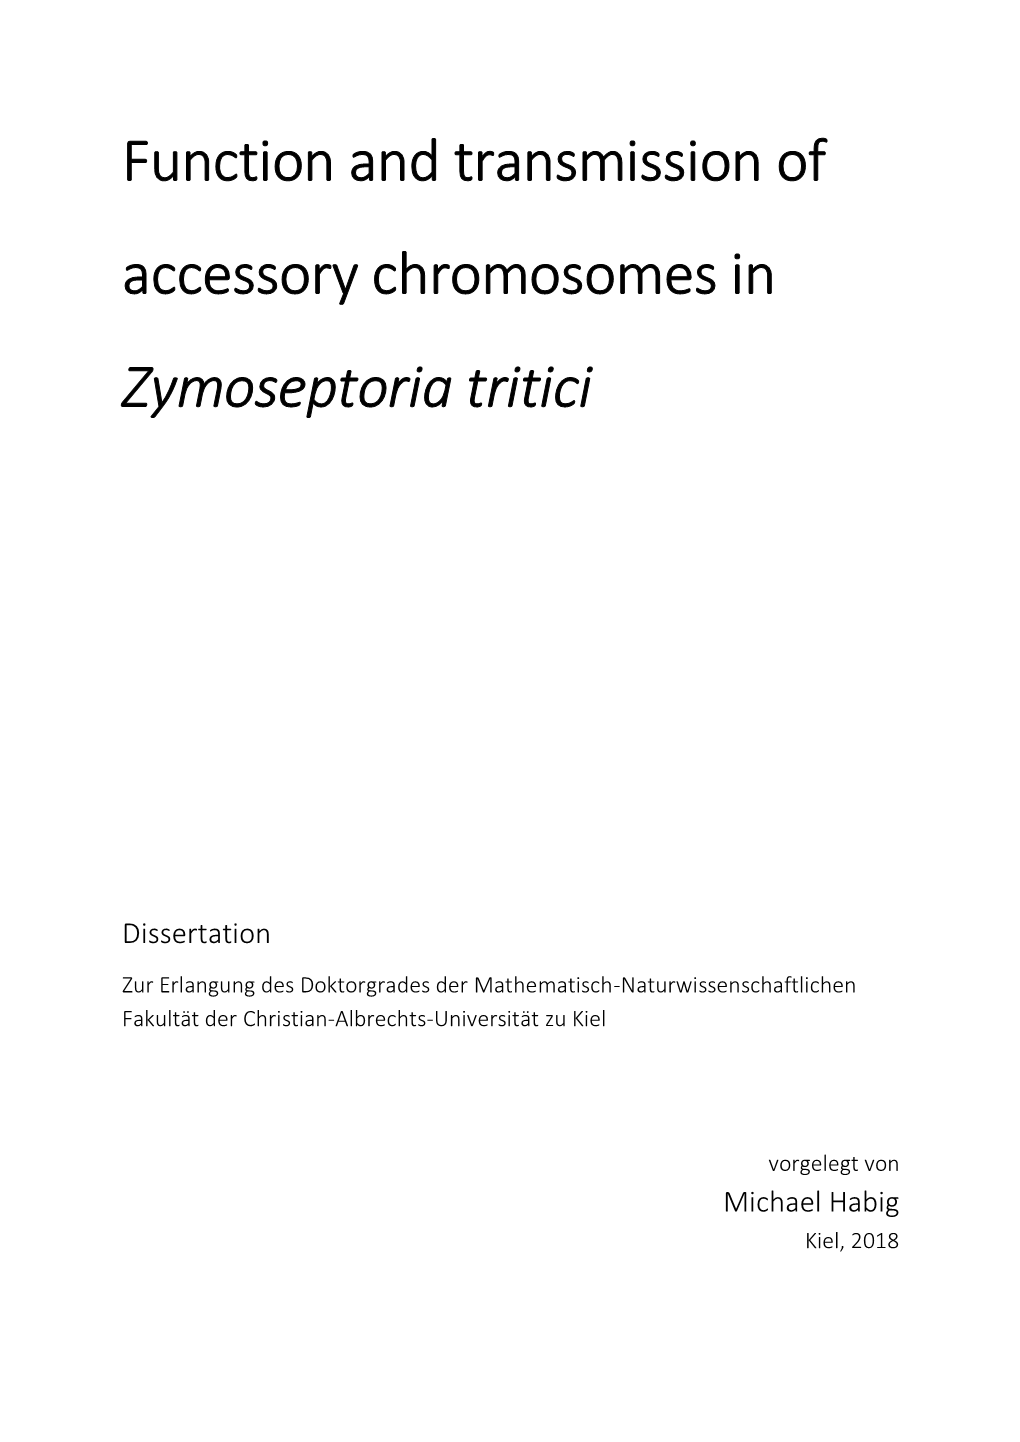 Function and Transmission of Accessory Chromosomes in Zymoseptoria Tritici